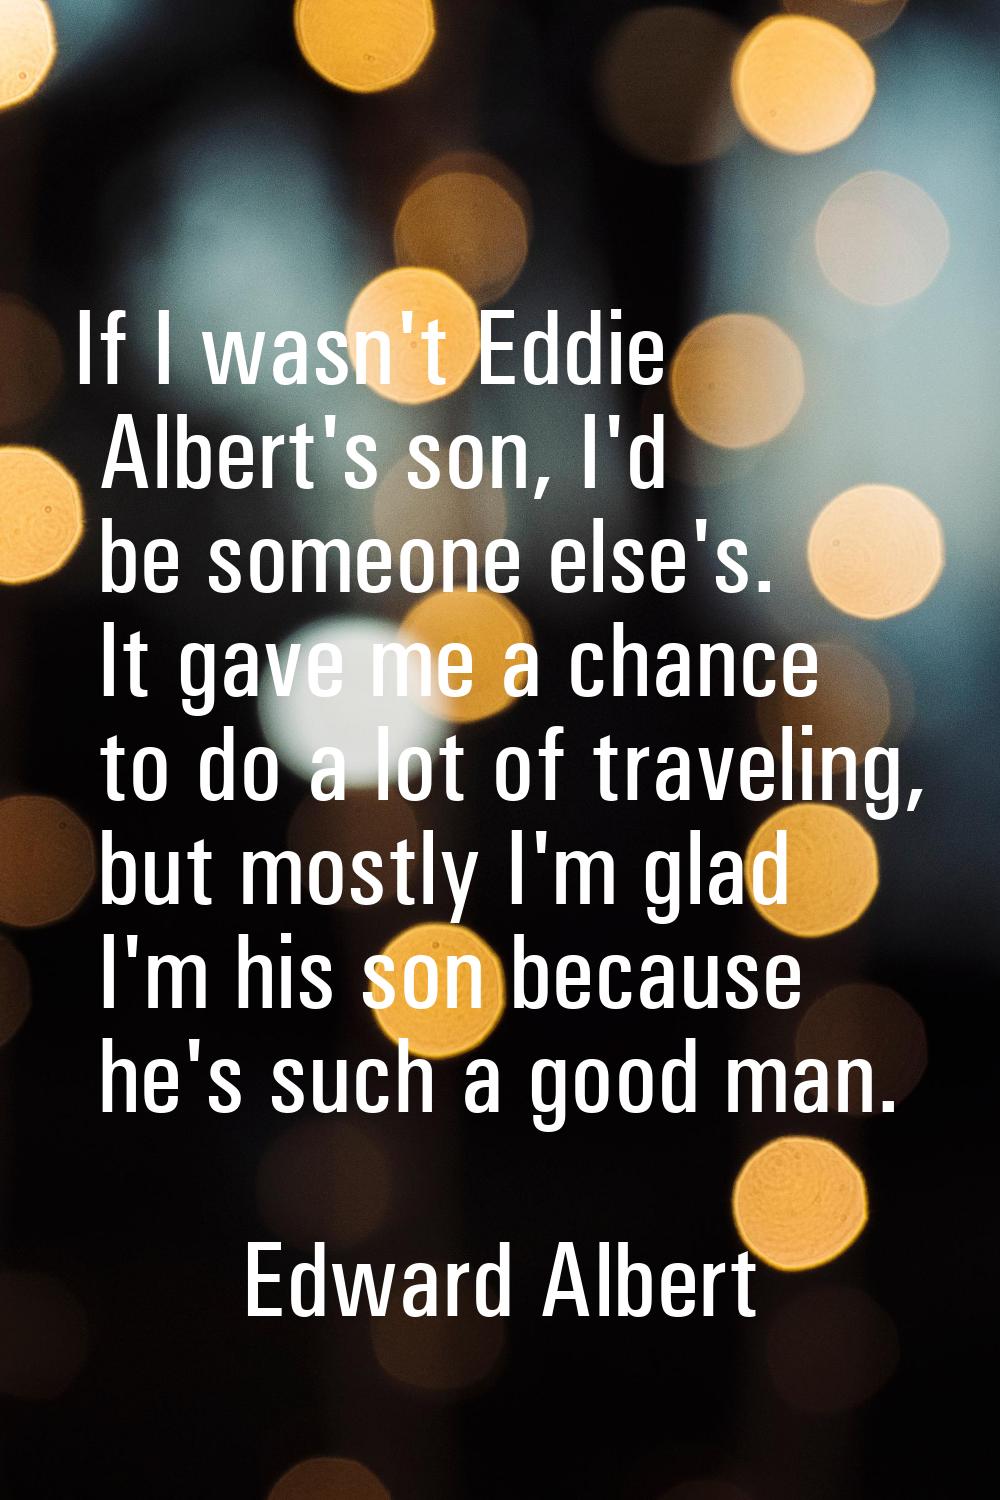 If I wasn't Eddie Albert's son, I'd be someone else's. It gave me a chance to do a lot of traveling